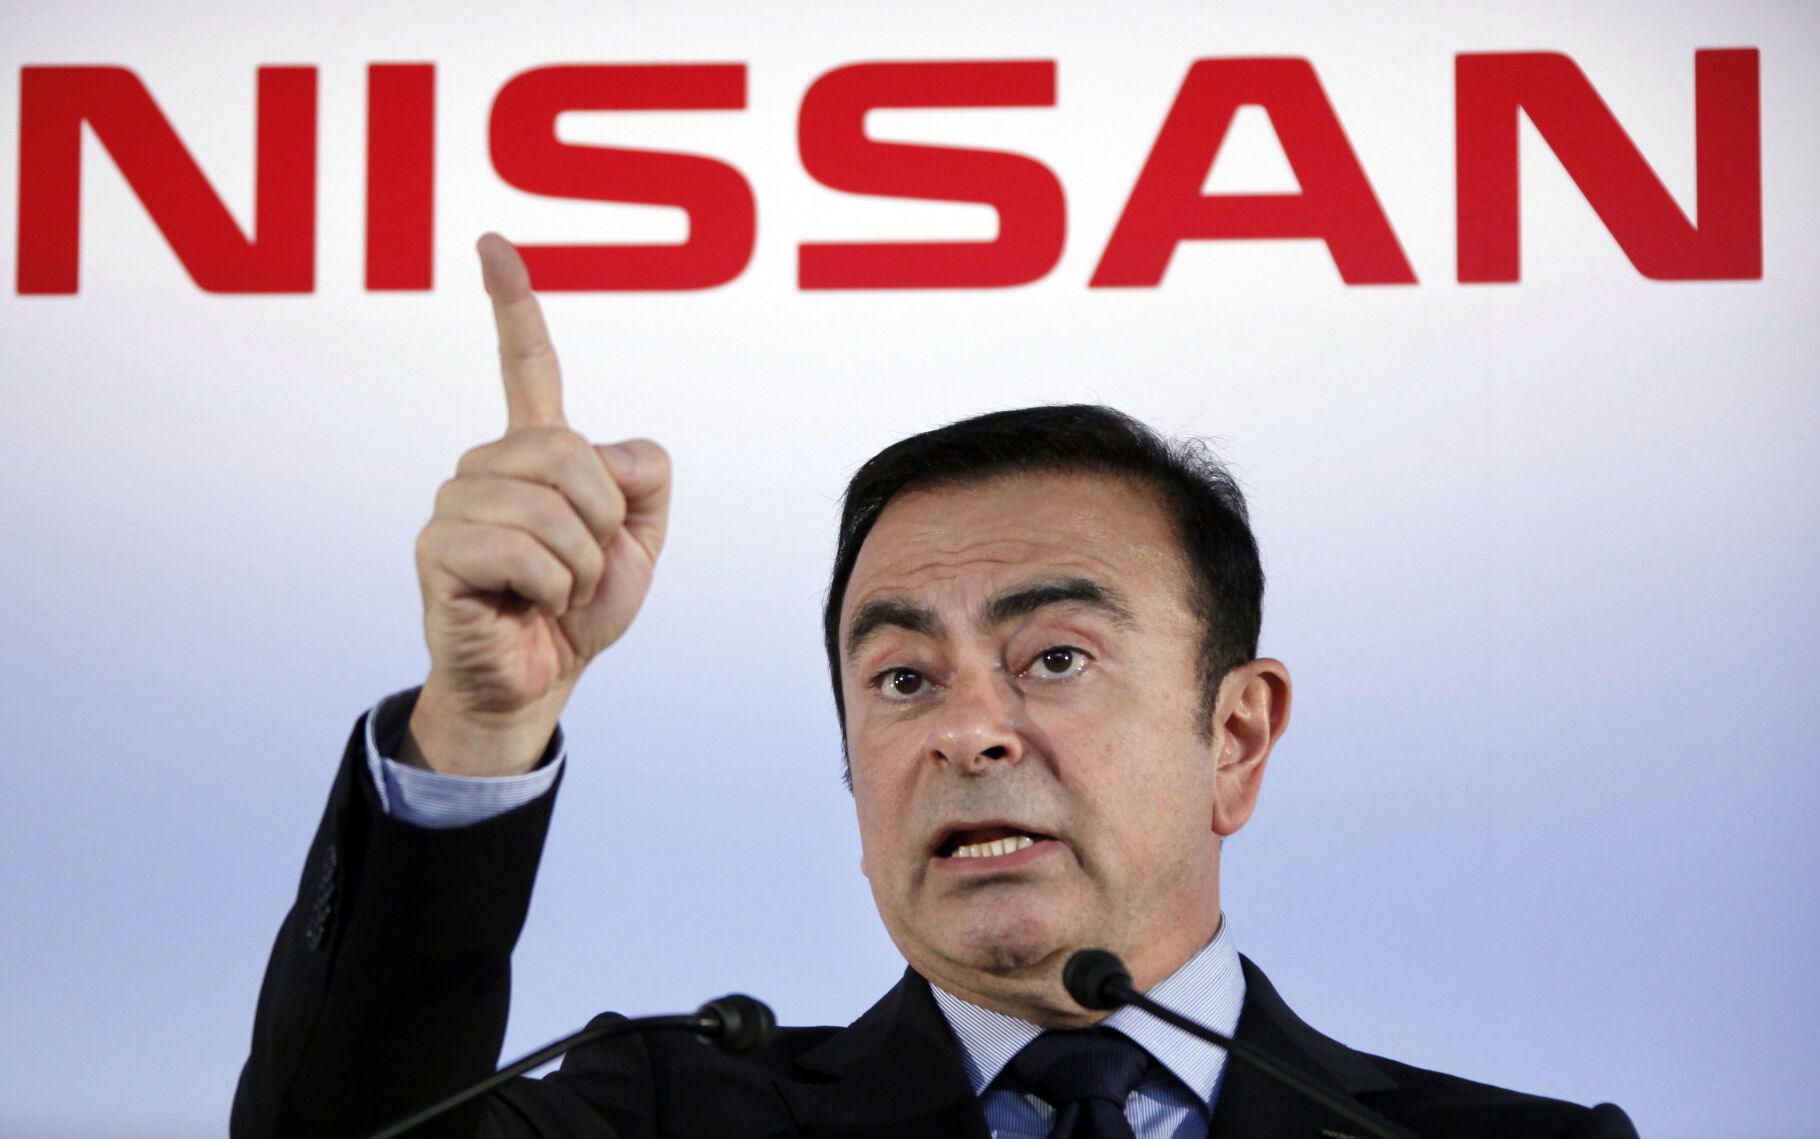 <p>FILE - Then Nissan Motor Co. President and CEO Carlos Ghosn speak during a press conference in Yokohama, near Tokyo on May 11, 2012. Ghosn, the former rock star businessman who fell from grace, is the subject of a multi-part documentary series, “Wanted: The Escape of Carlos Ghosn," premiering globally on Apple TV+, Friday, Aug. 25. (AP Photo/Koji Sasahara, File)</p>   PHOTO CREDIT: Koji Sasahara
The Associated Press